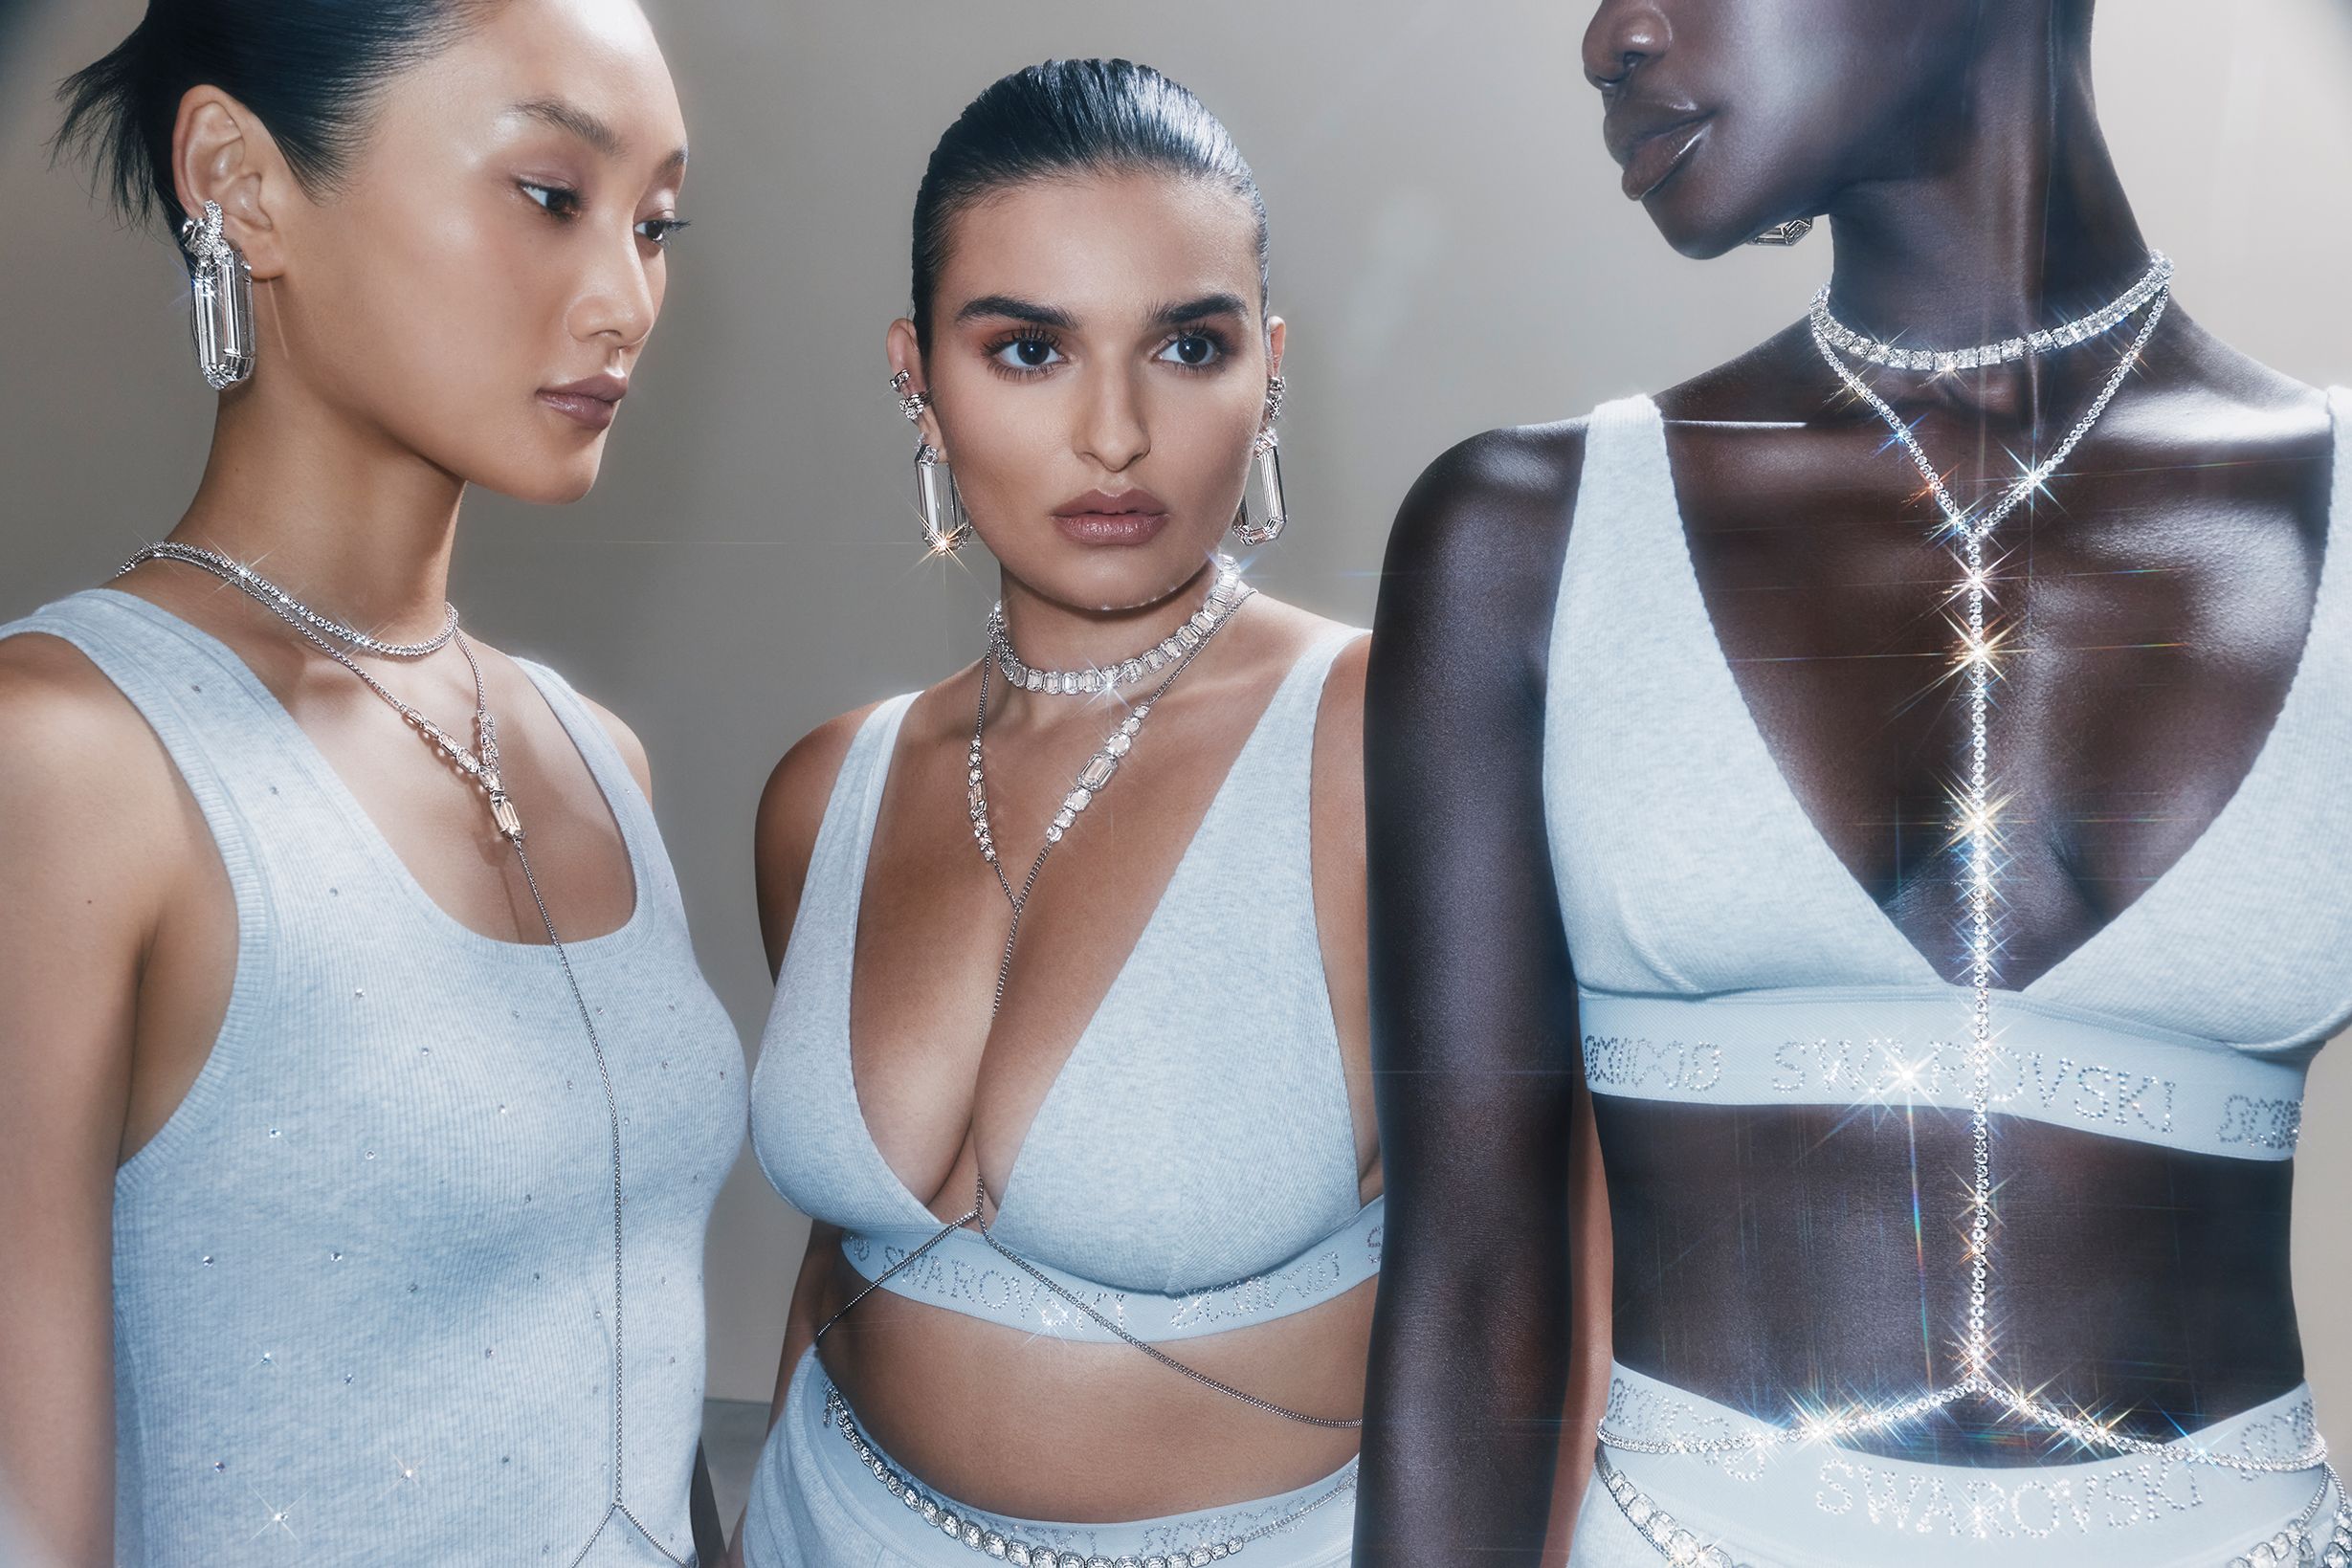 Kim Kardashian Covers Herself in Crystals for Swarovski X SKIMS Launch Party  - Every Celeb Guest In Attendance Revealed! : Photo 4983817